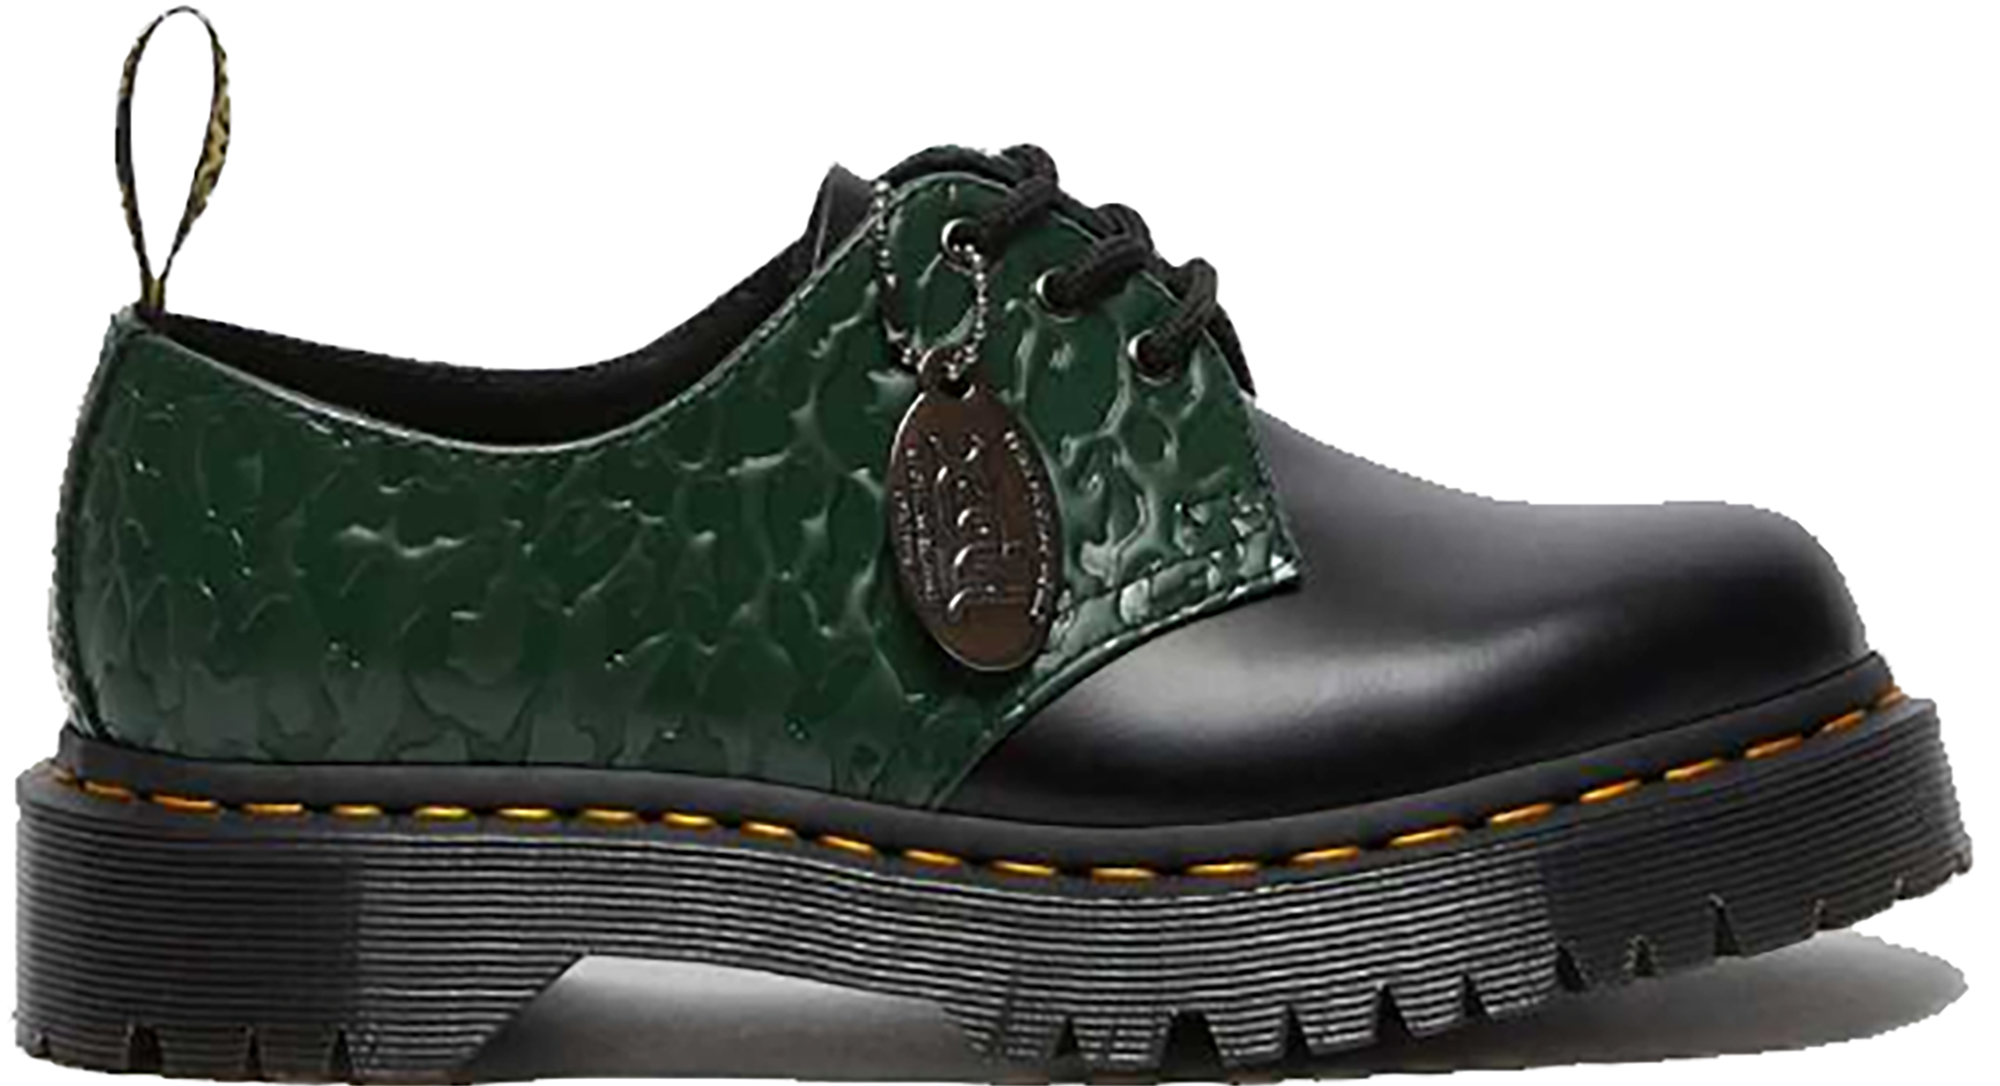 Dr. Martens 1461 Bex X-Girl Leather 